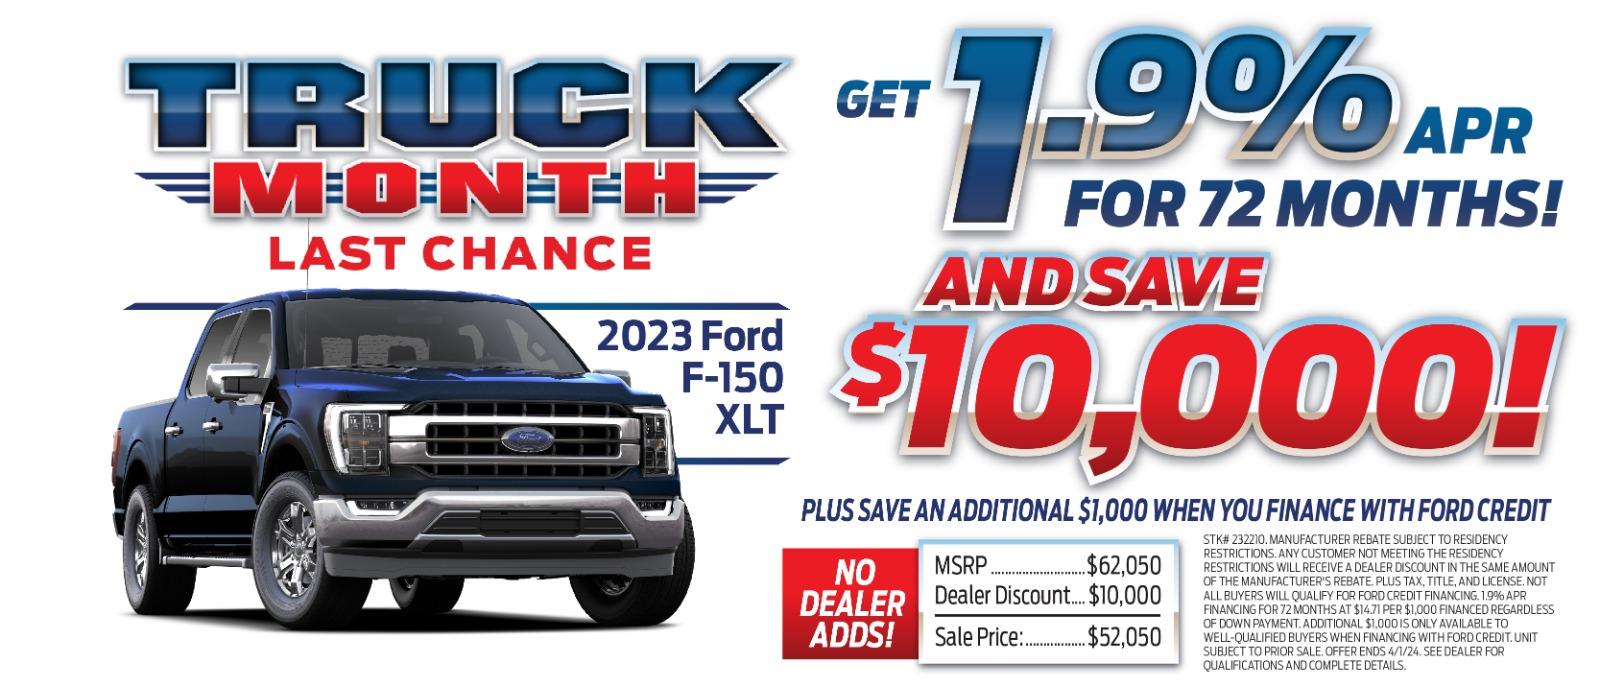 March Ford F-150 hero banner offer